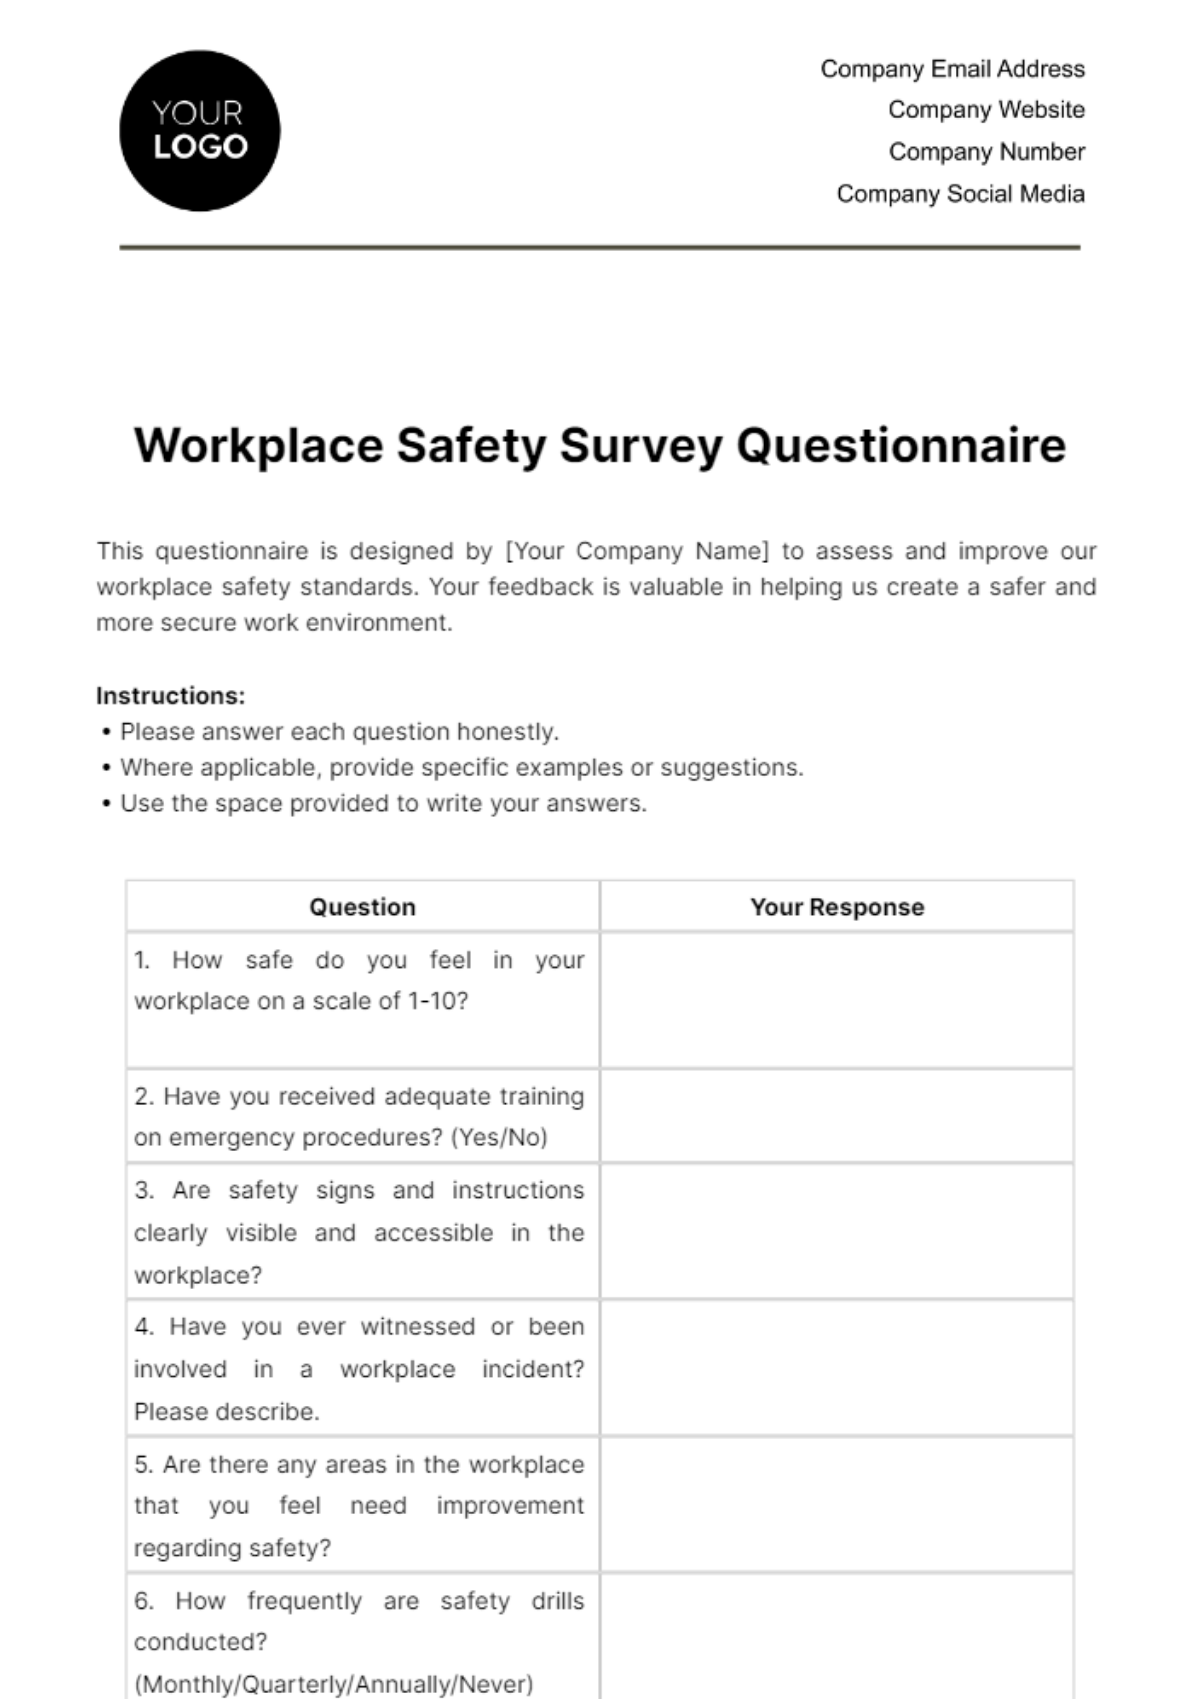 Workplace Safety Survey Questionnaire Template